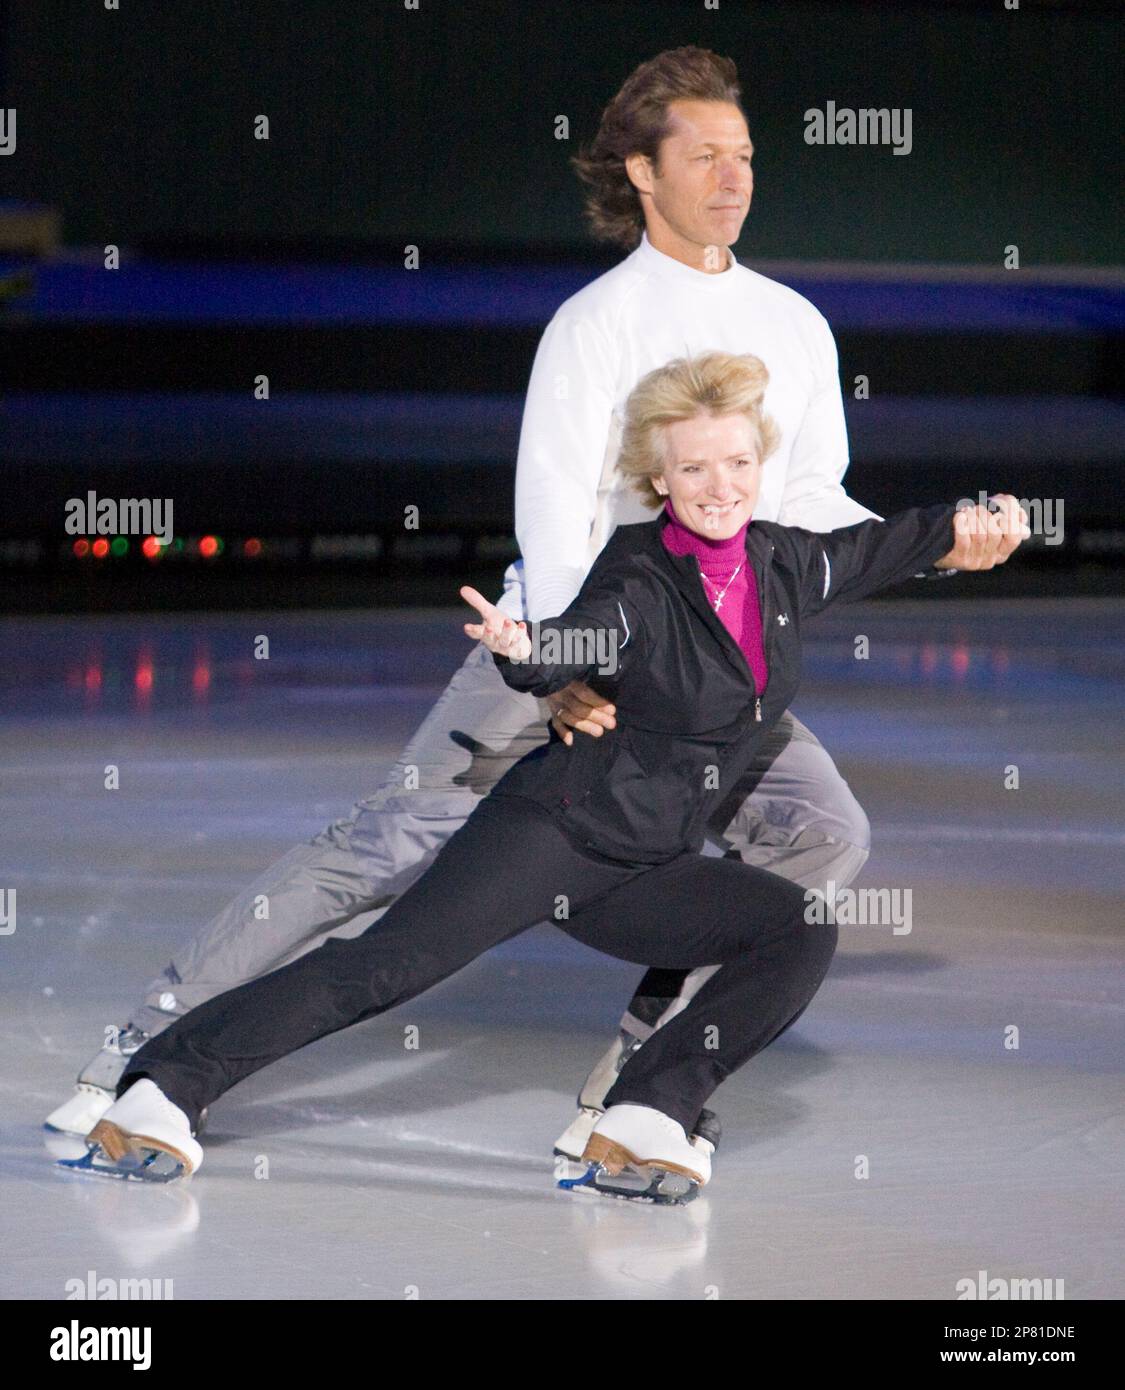 Former professional hockey player Ron Duguay, left, and figure skater Barbara Underhill skate during a media event for the CBC series